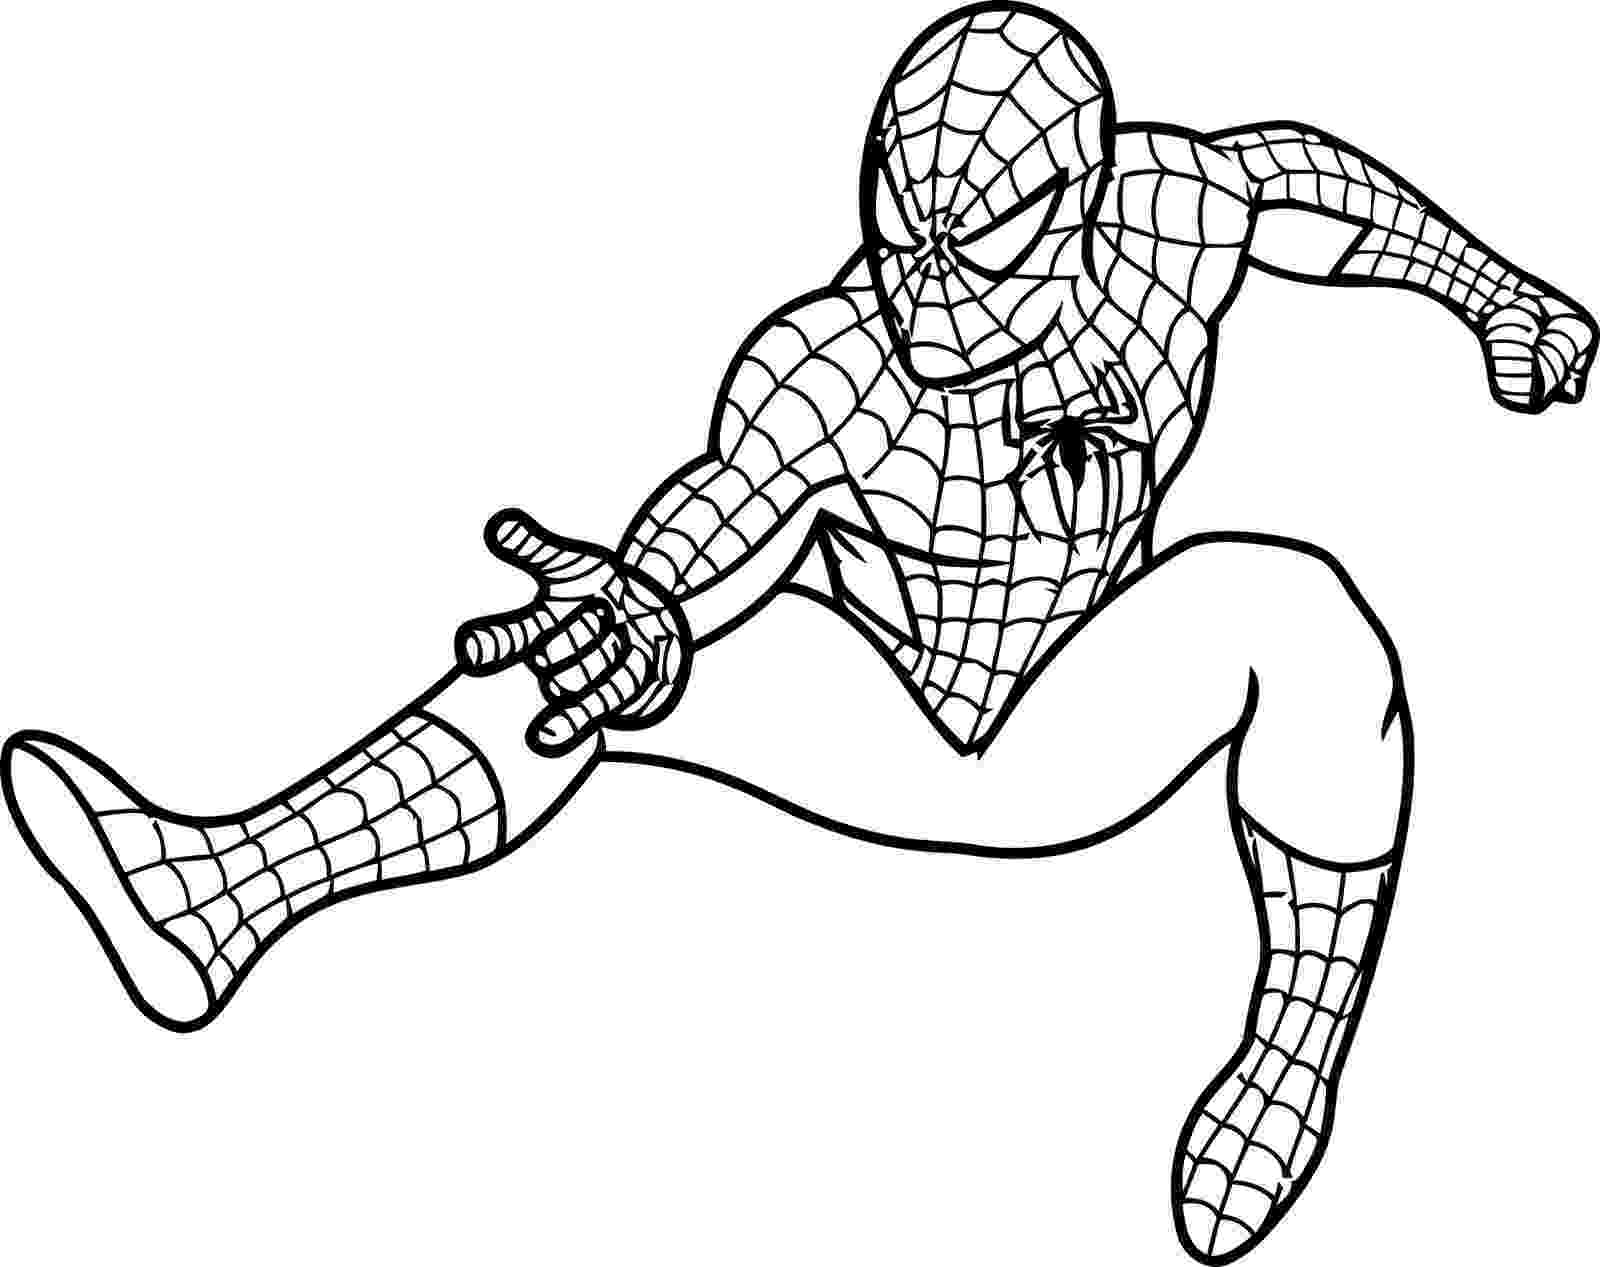 spiderman coloring pages free printable spiderman coloring pages for kids cool2bkids spiderman coloring free pages 